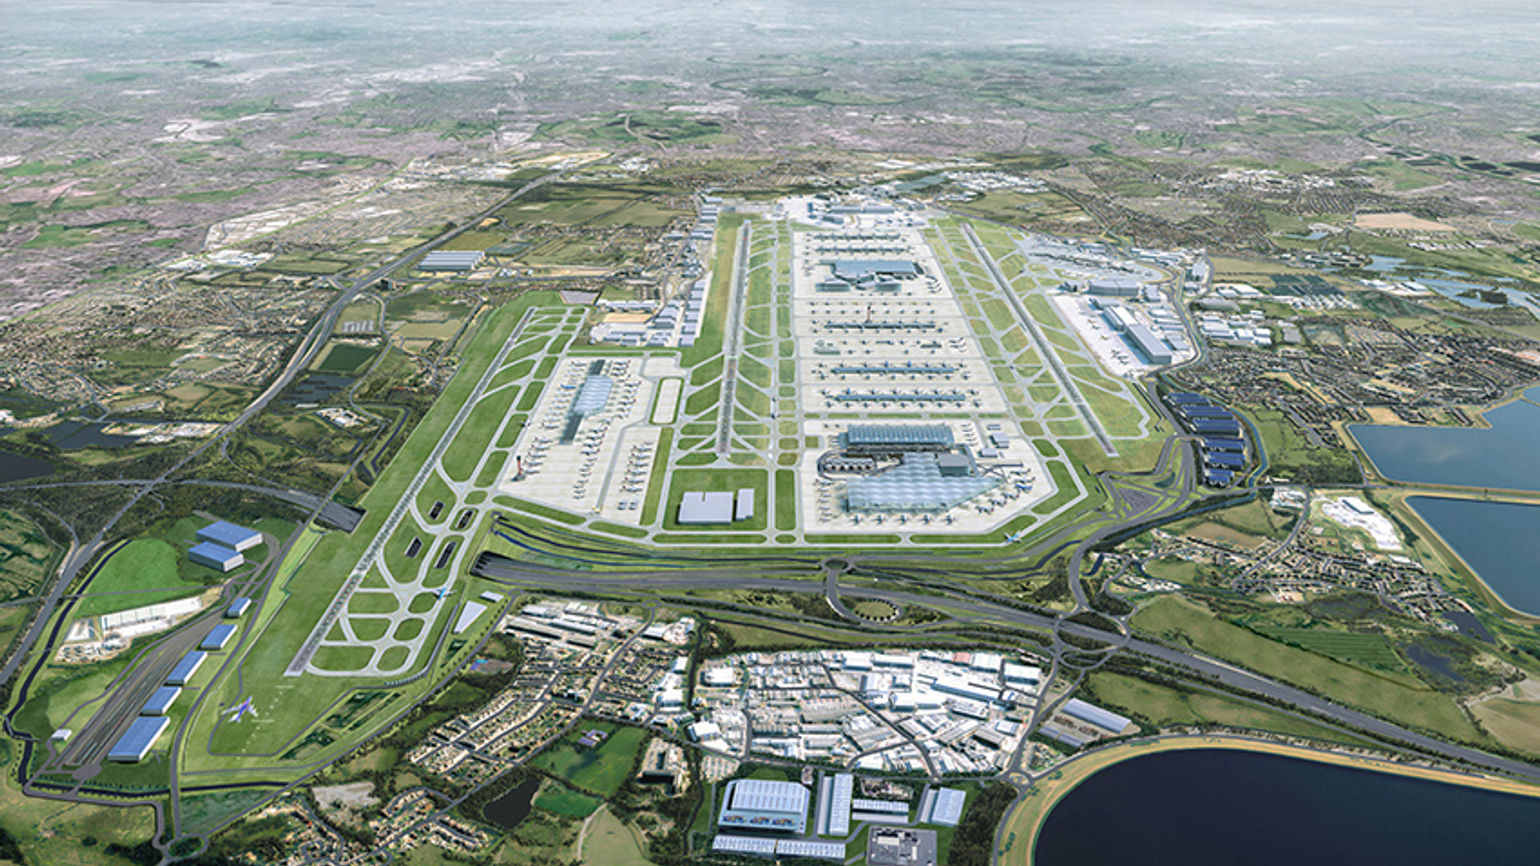 Heathrow planning £5 drop-off charge